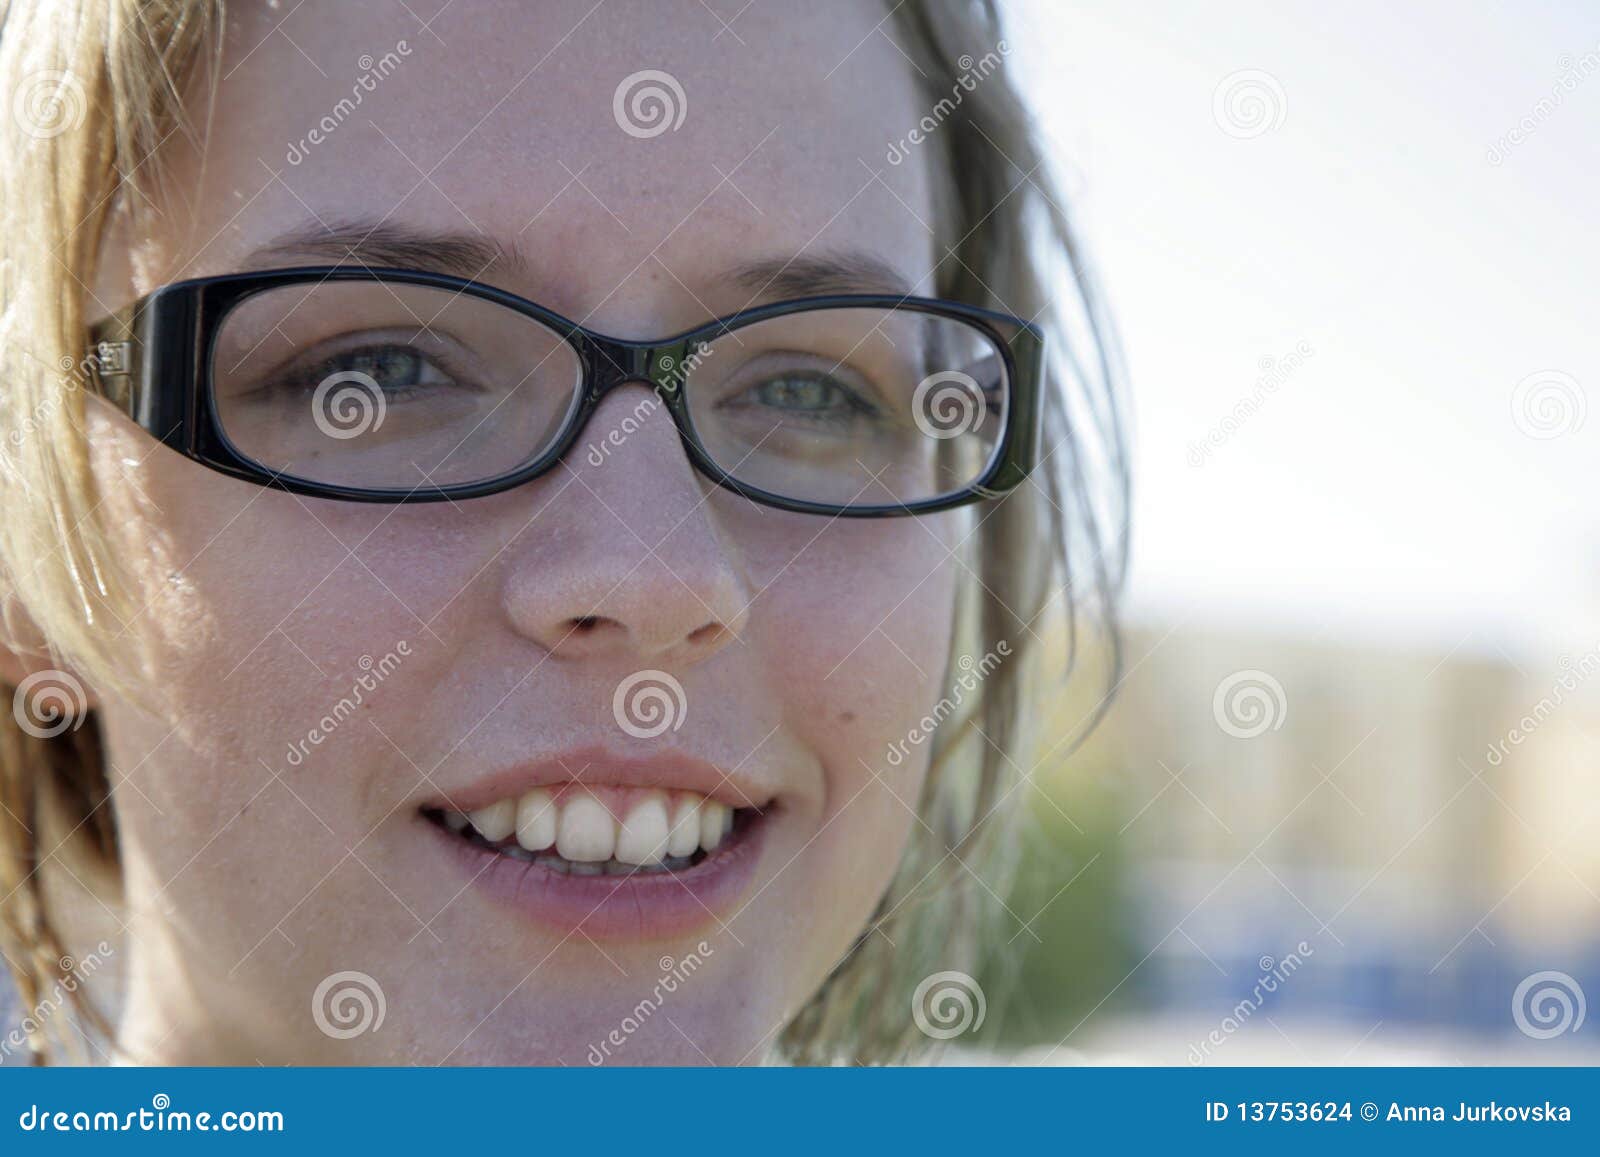 Cute Girl Wearing Glasses Stock Images Image 13753624